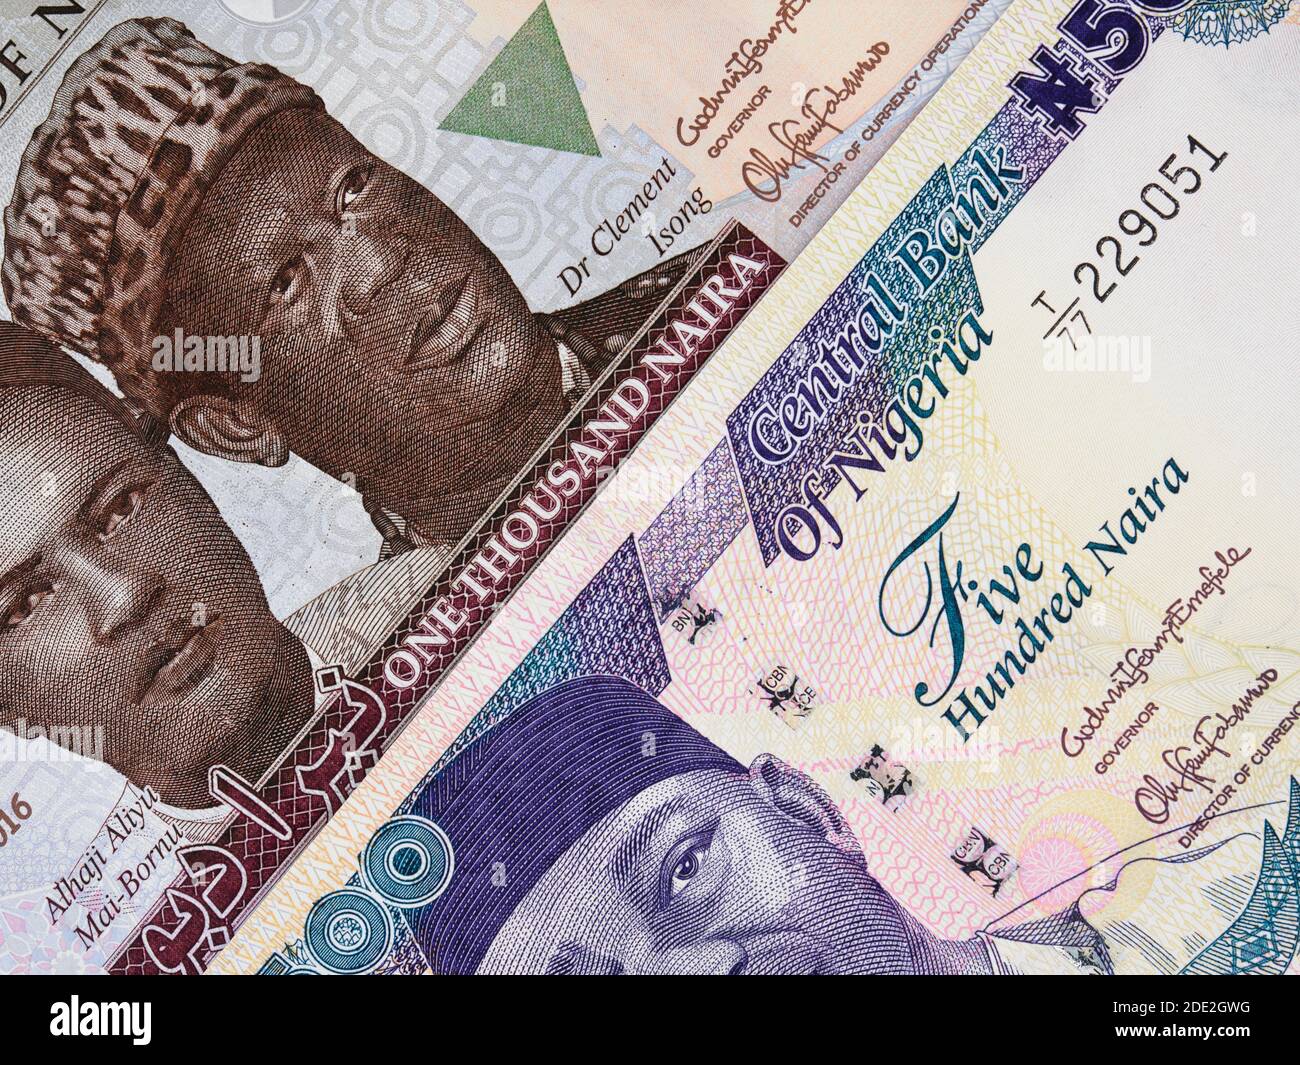 Nigerian currency naira central bank notes, Nigeria money Stock Photo